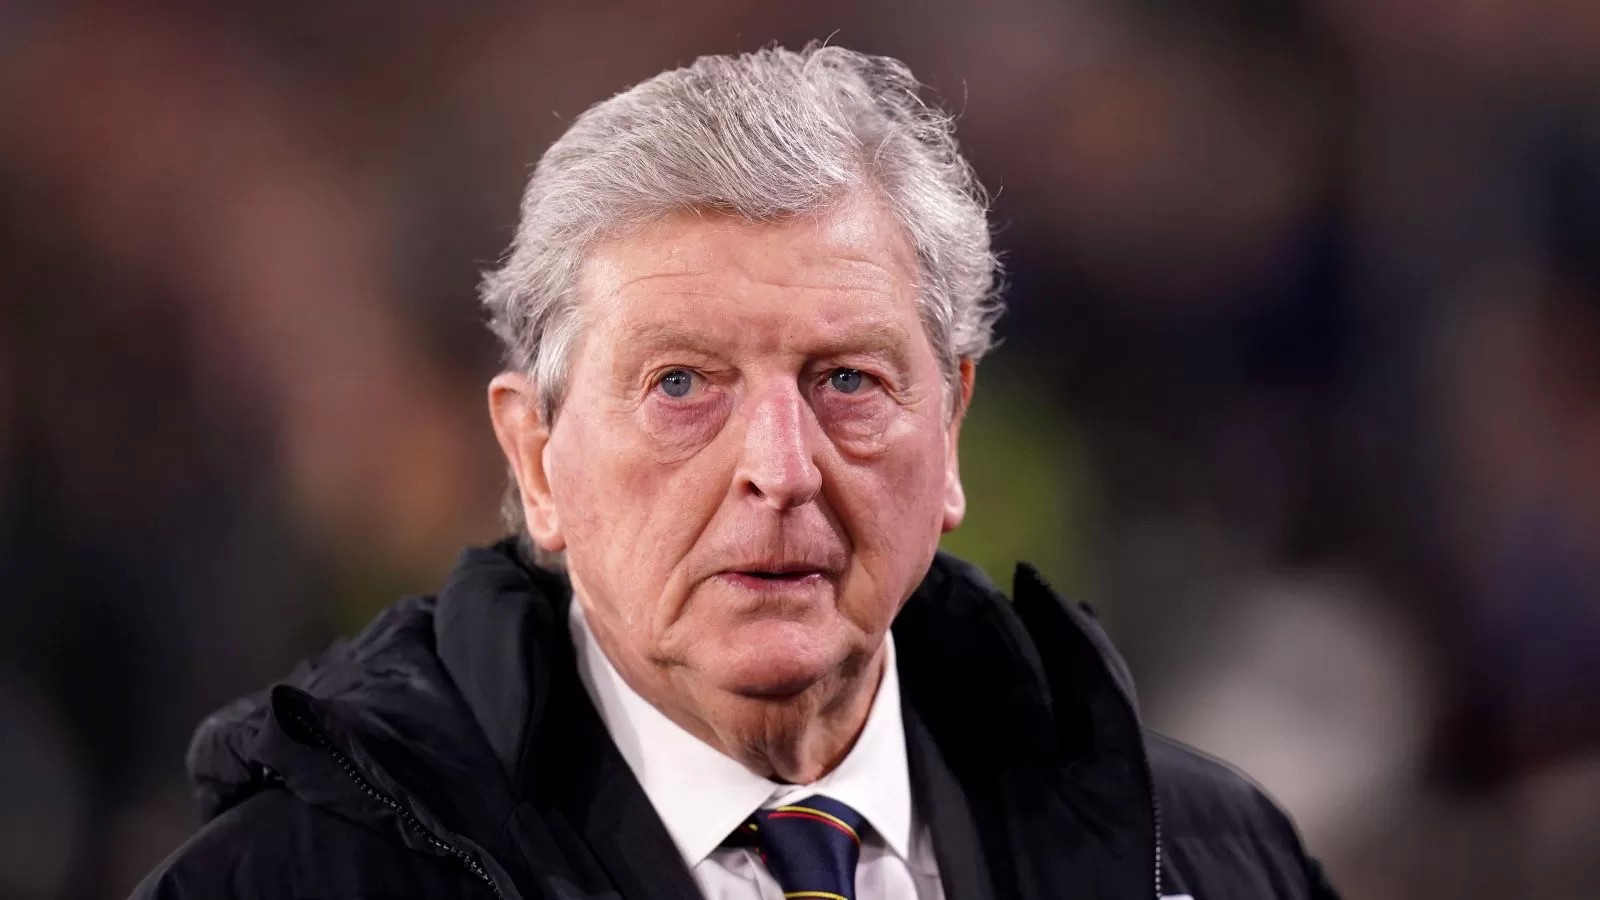 Roy Hodgson returns to Crystal Palace as manager until end of season